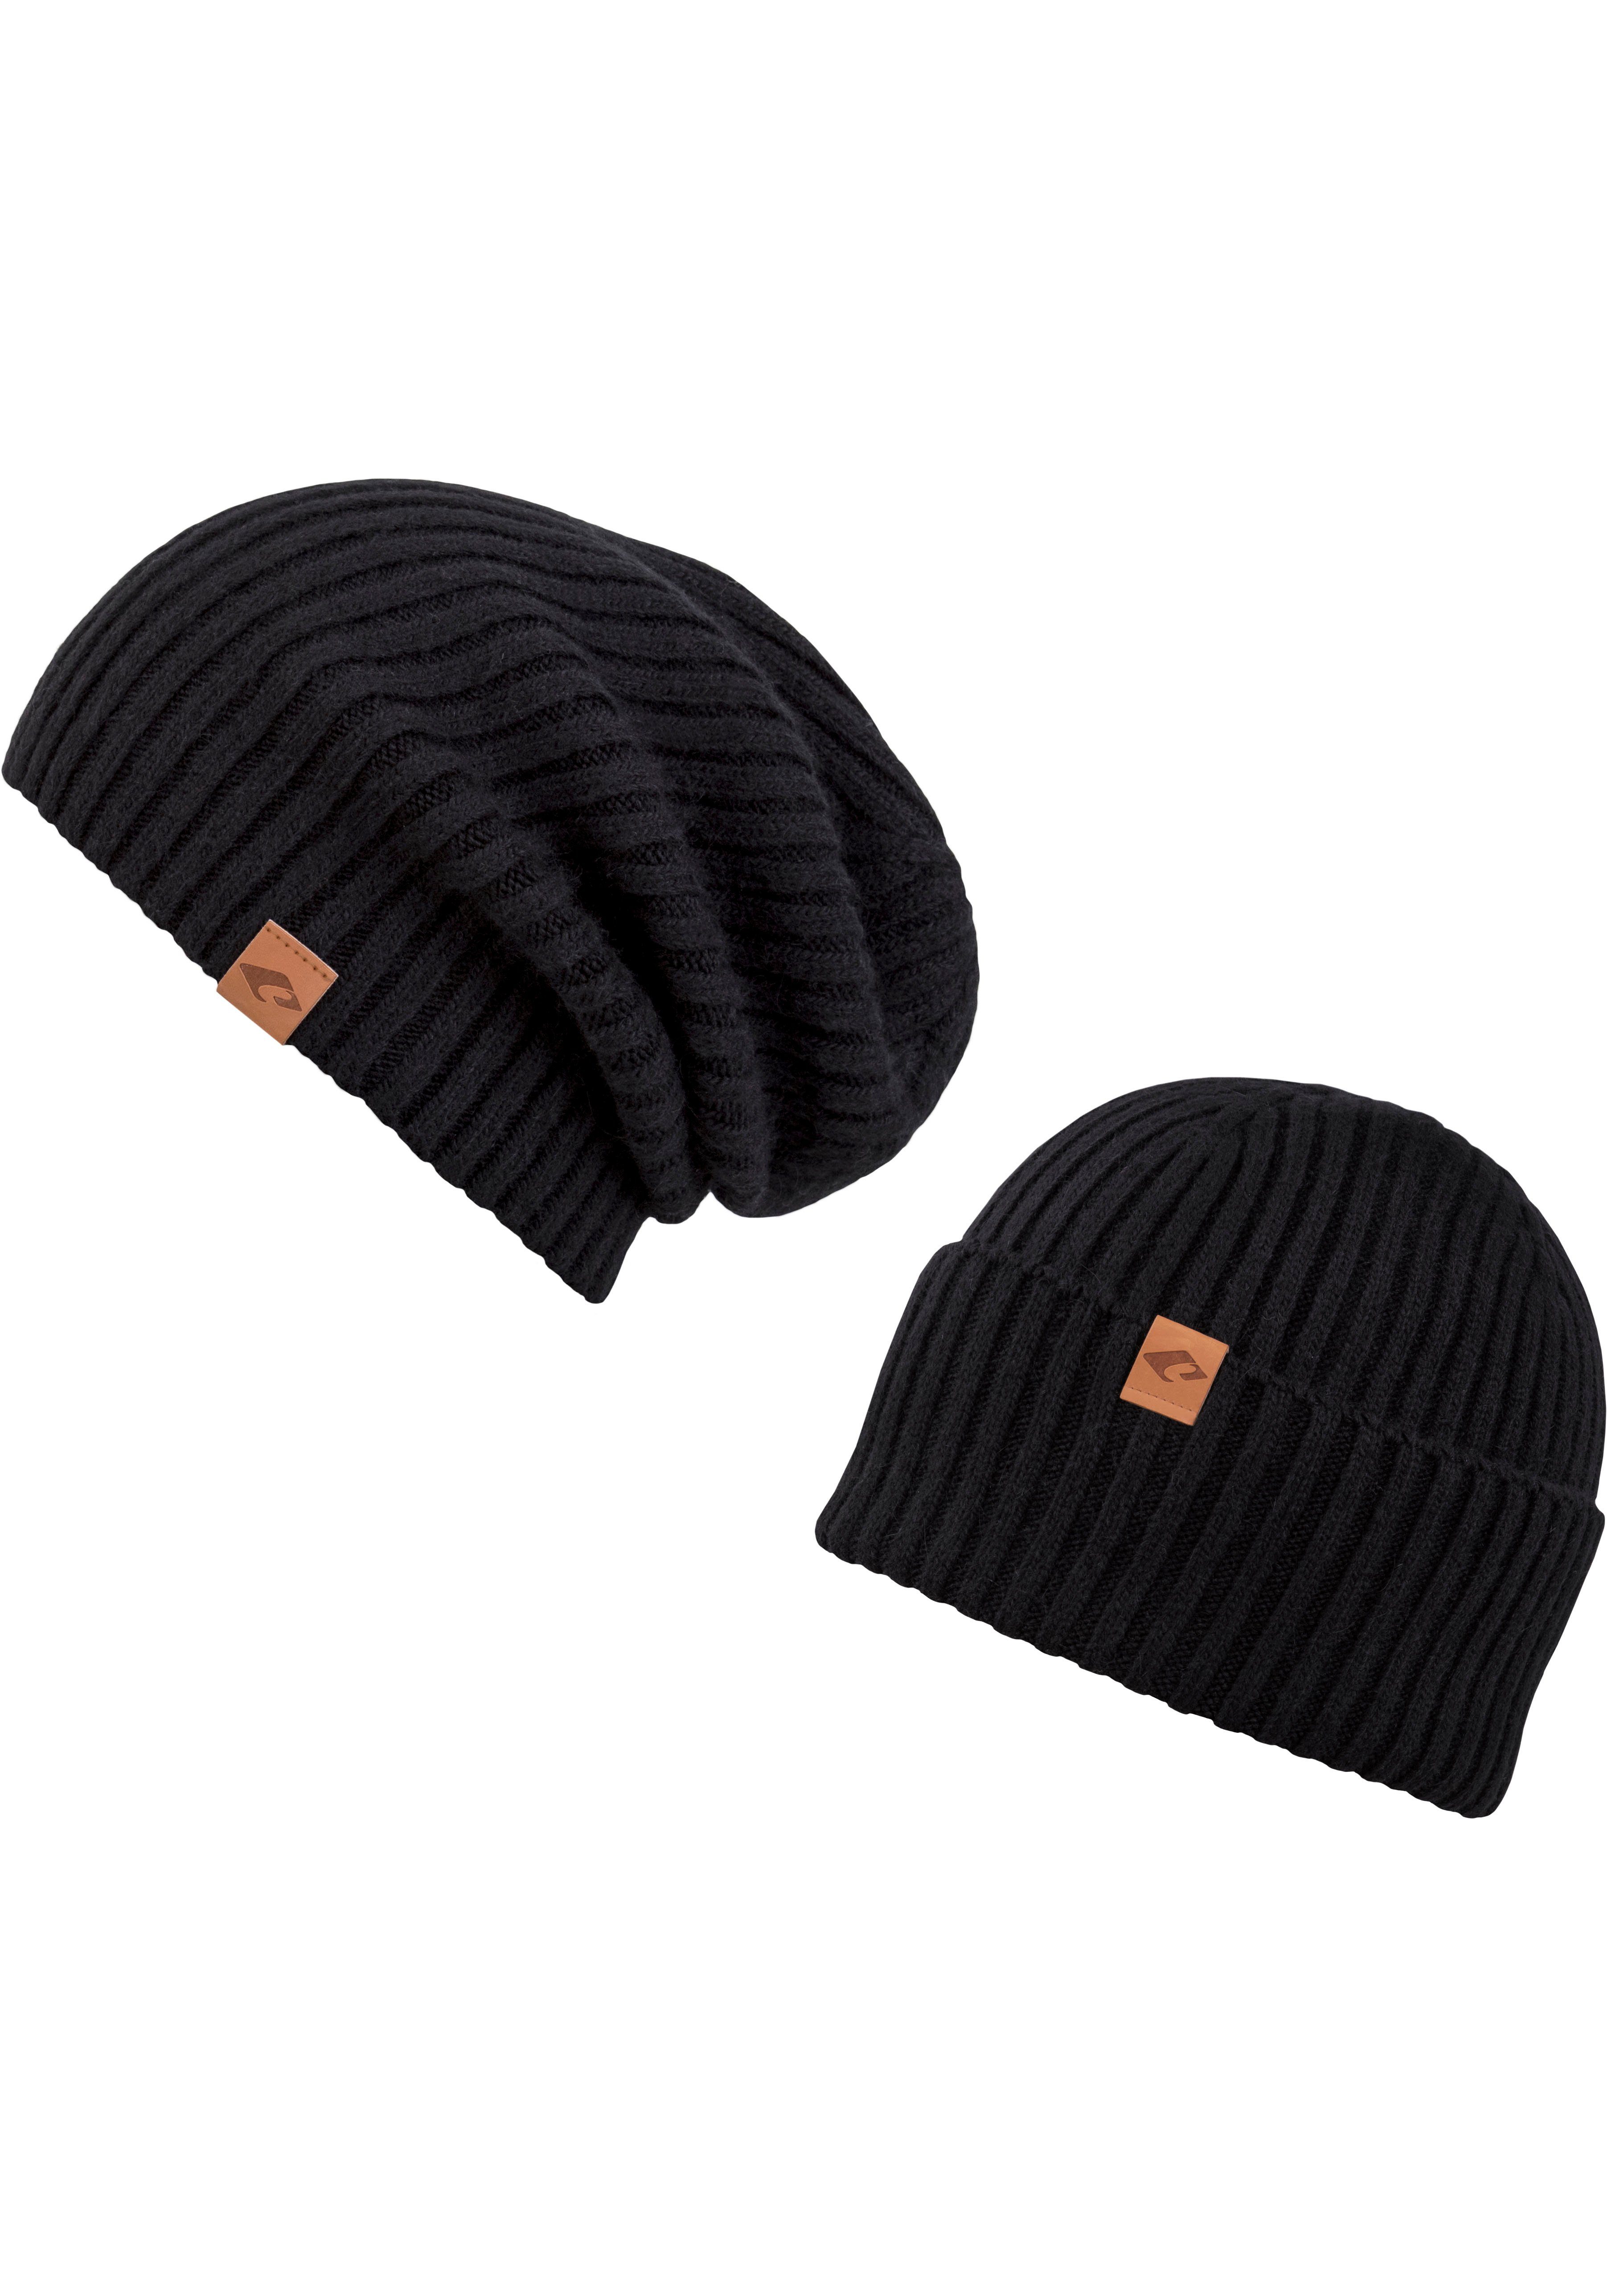 chillouts Beanie Justin Hat black